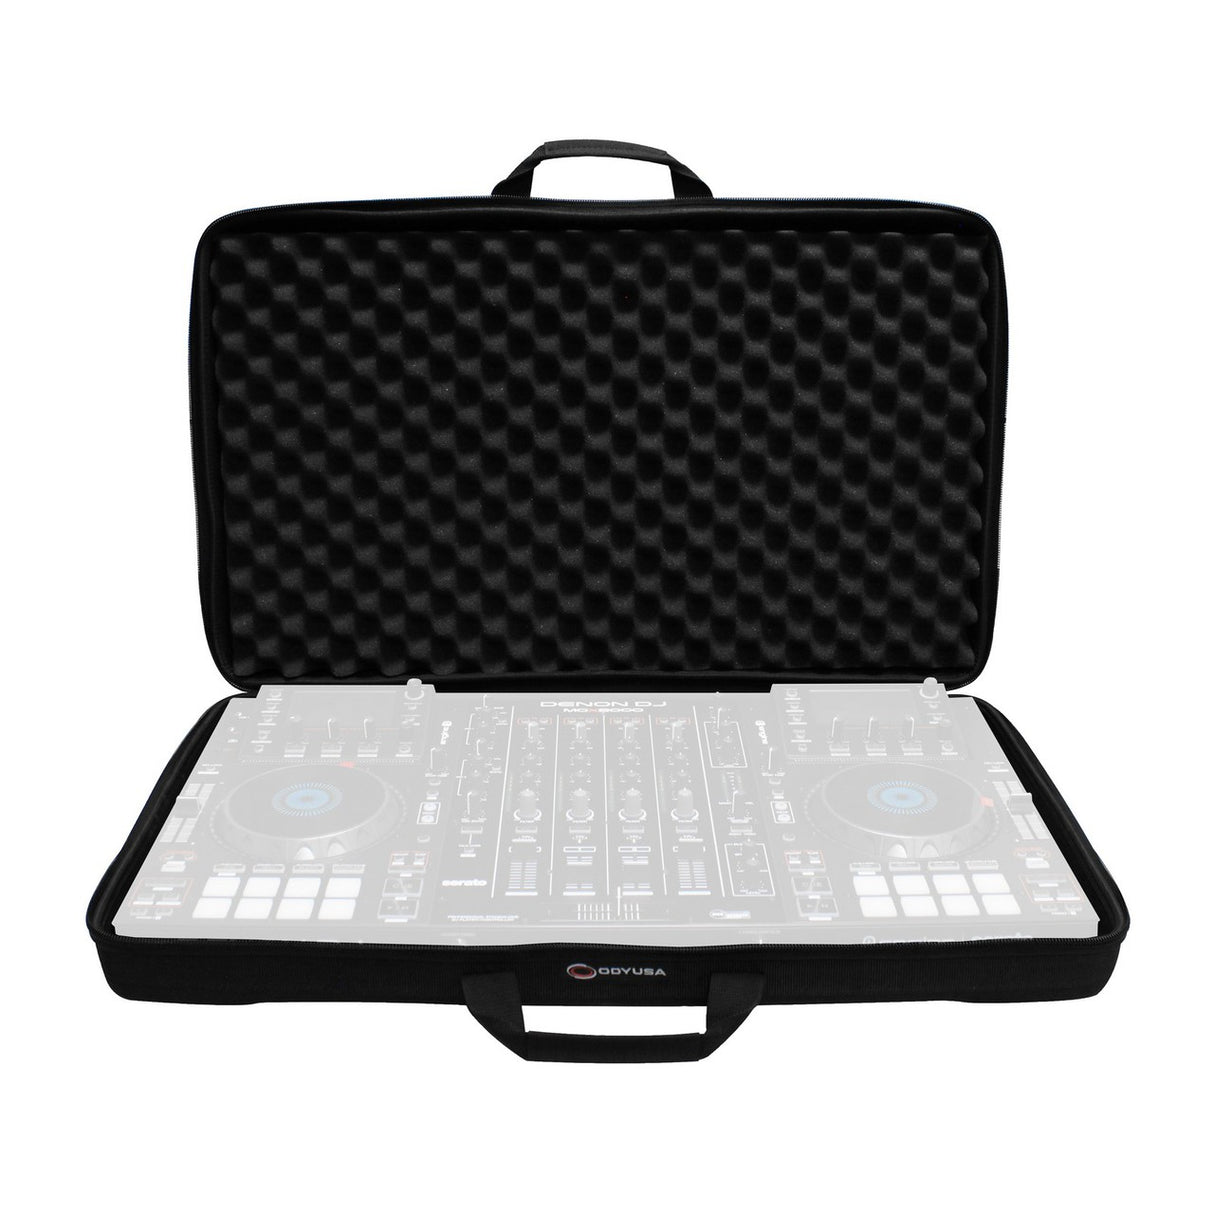 Odyssey Cases BMSLDJCL | Universal DJ Controller Carrying Bag Large